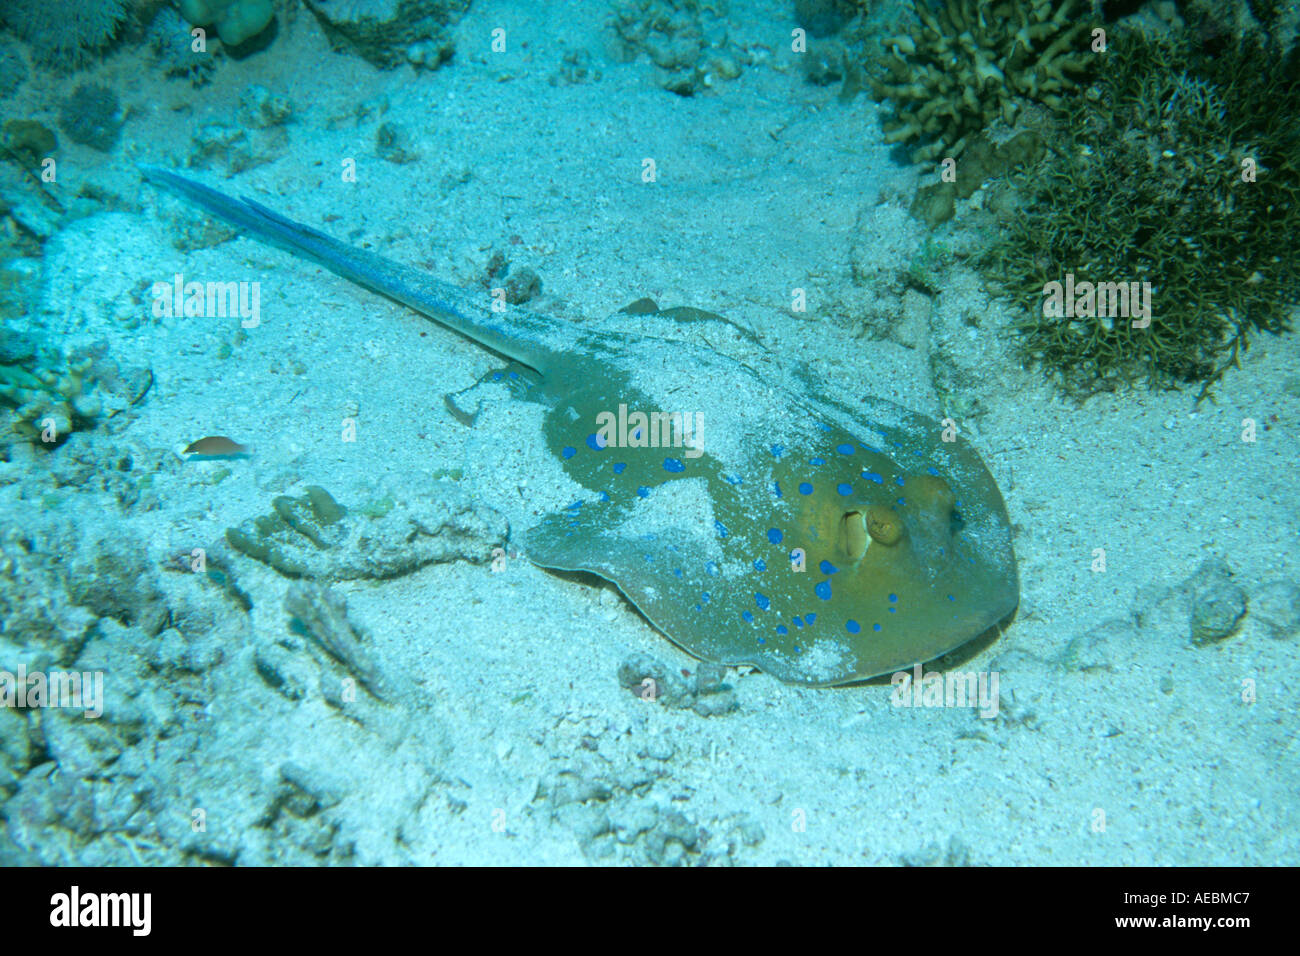 Bluespotted Ribbontail Ray Taeniura lymma buries itself in the sand to blend in with the background Sanganeb Reef Sudan Red Sea Stock Photo